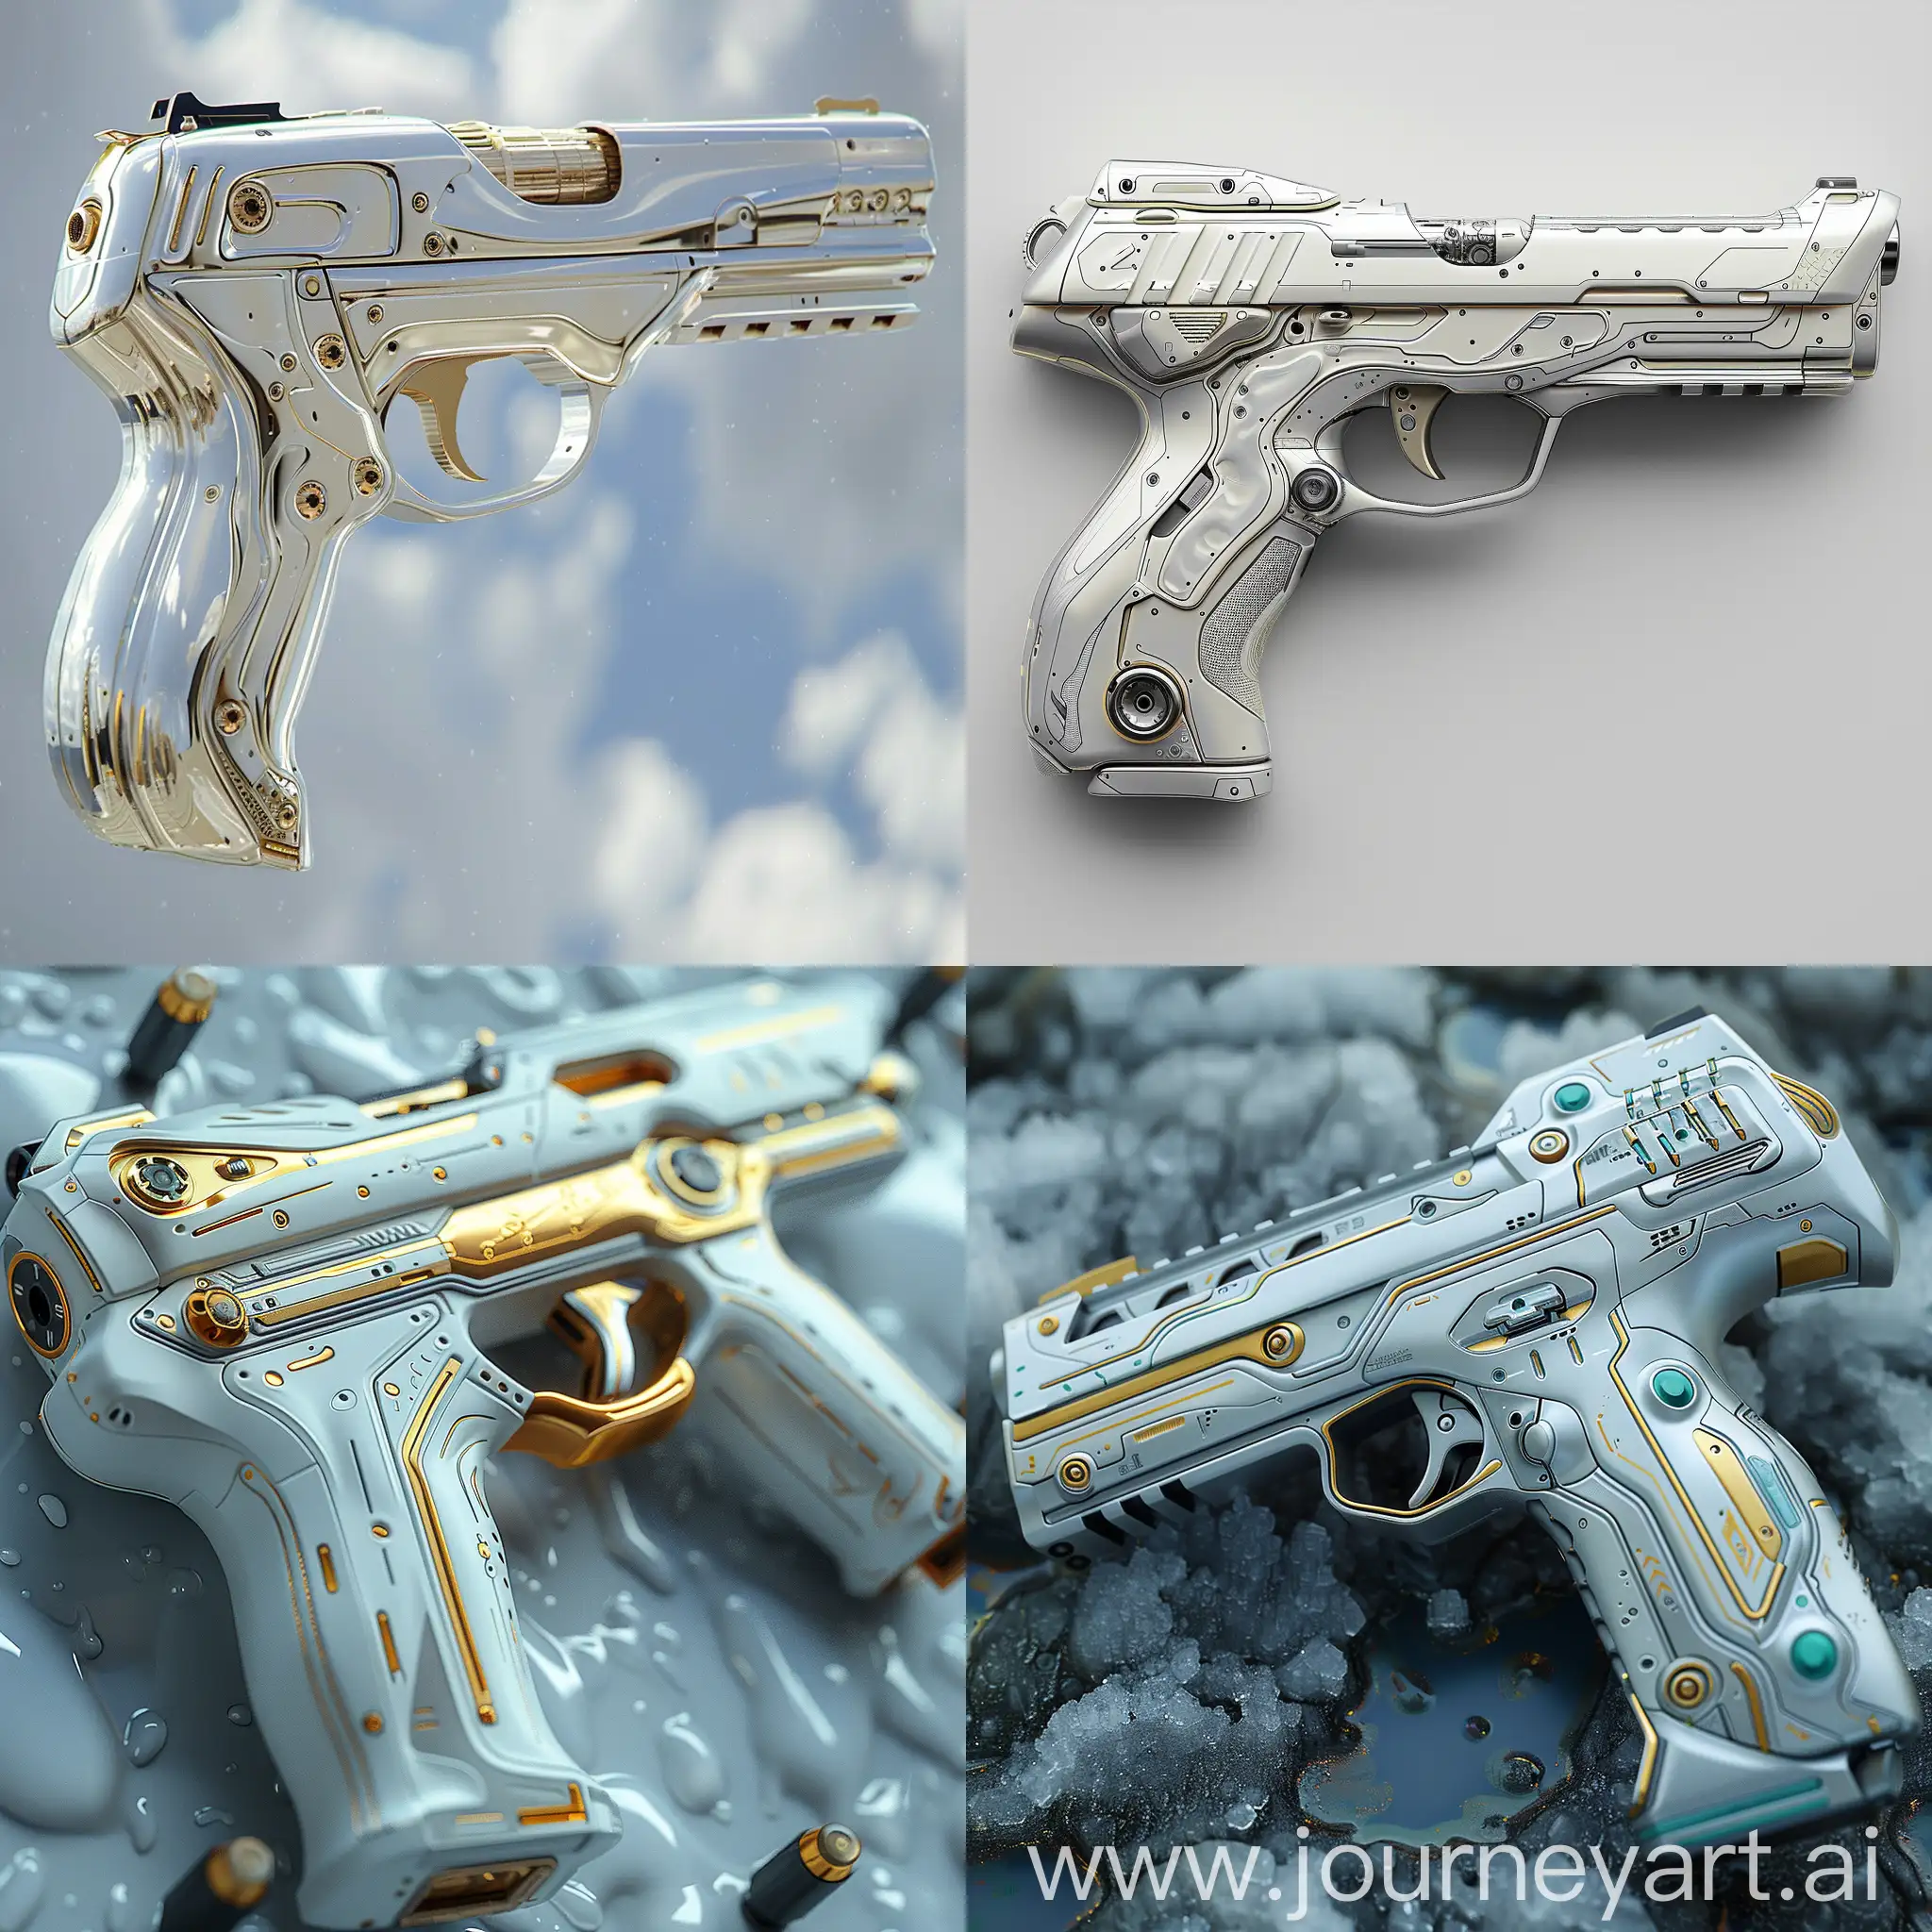 Futuristic-Stainless-Steel-Pistol-with-Advanced-Electronics